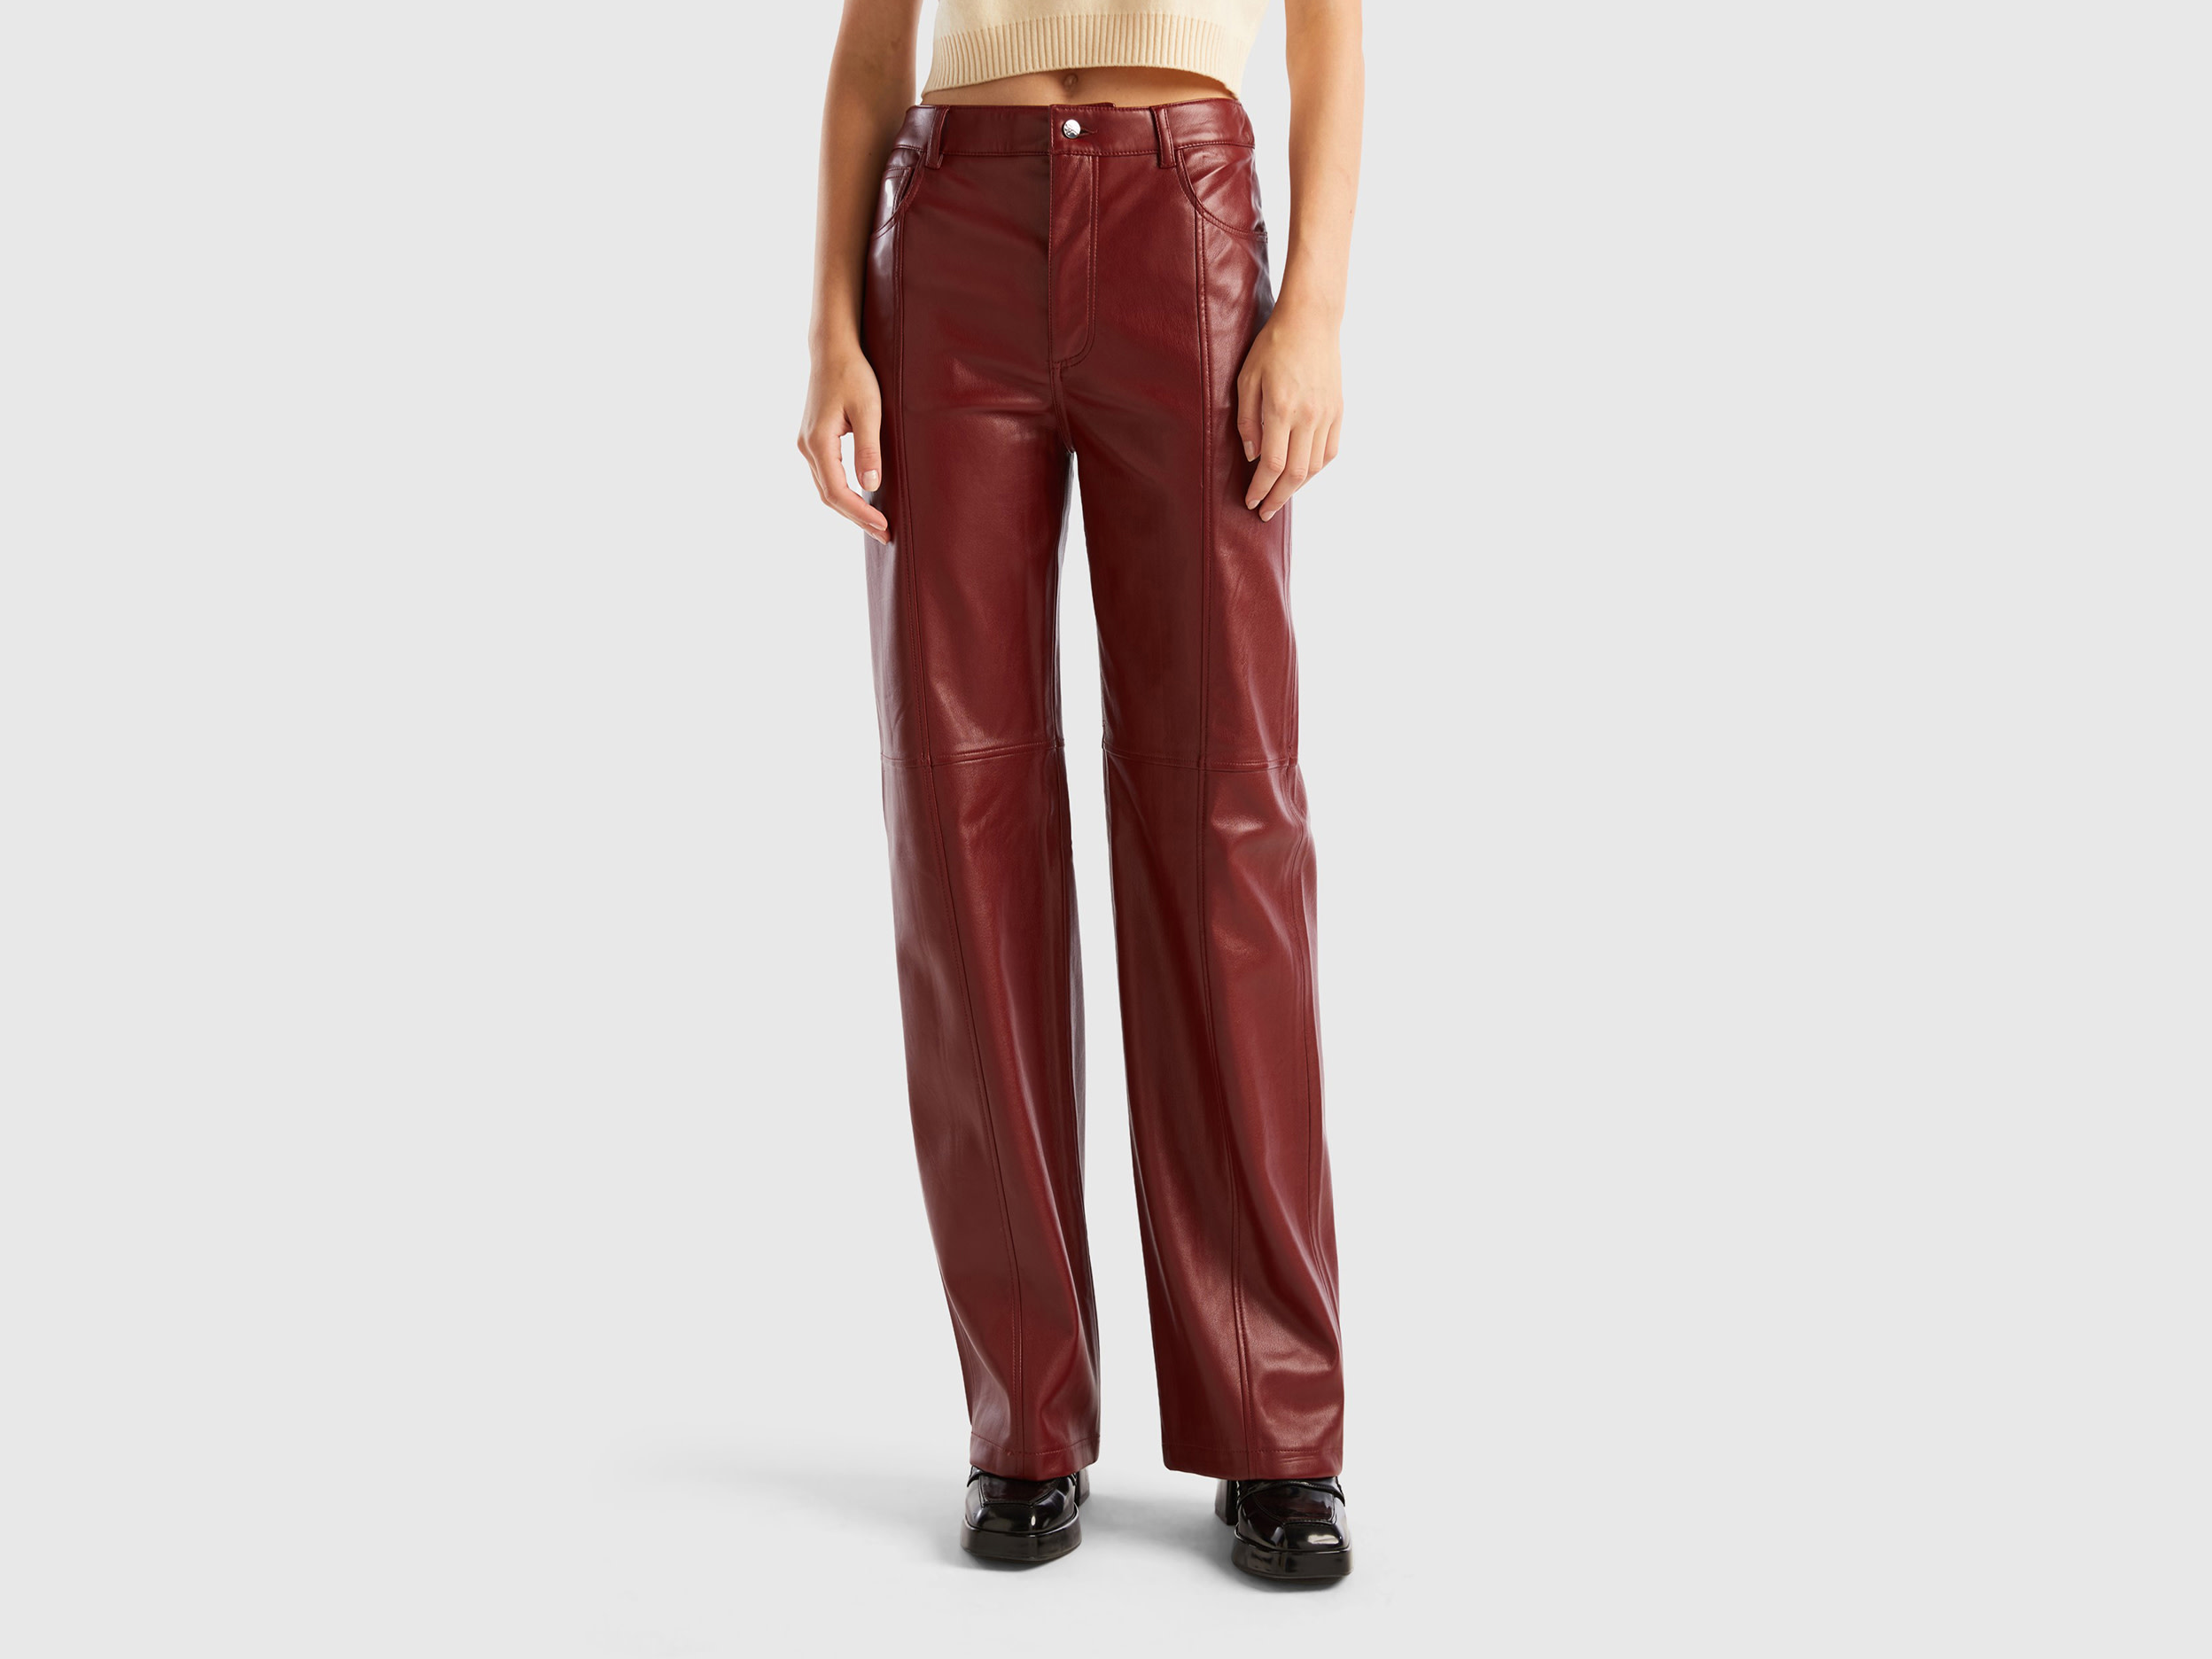 Benetton, Trousers In Imitation Leather Fabric, size 10, Burgundy, Women